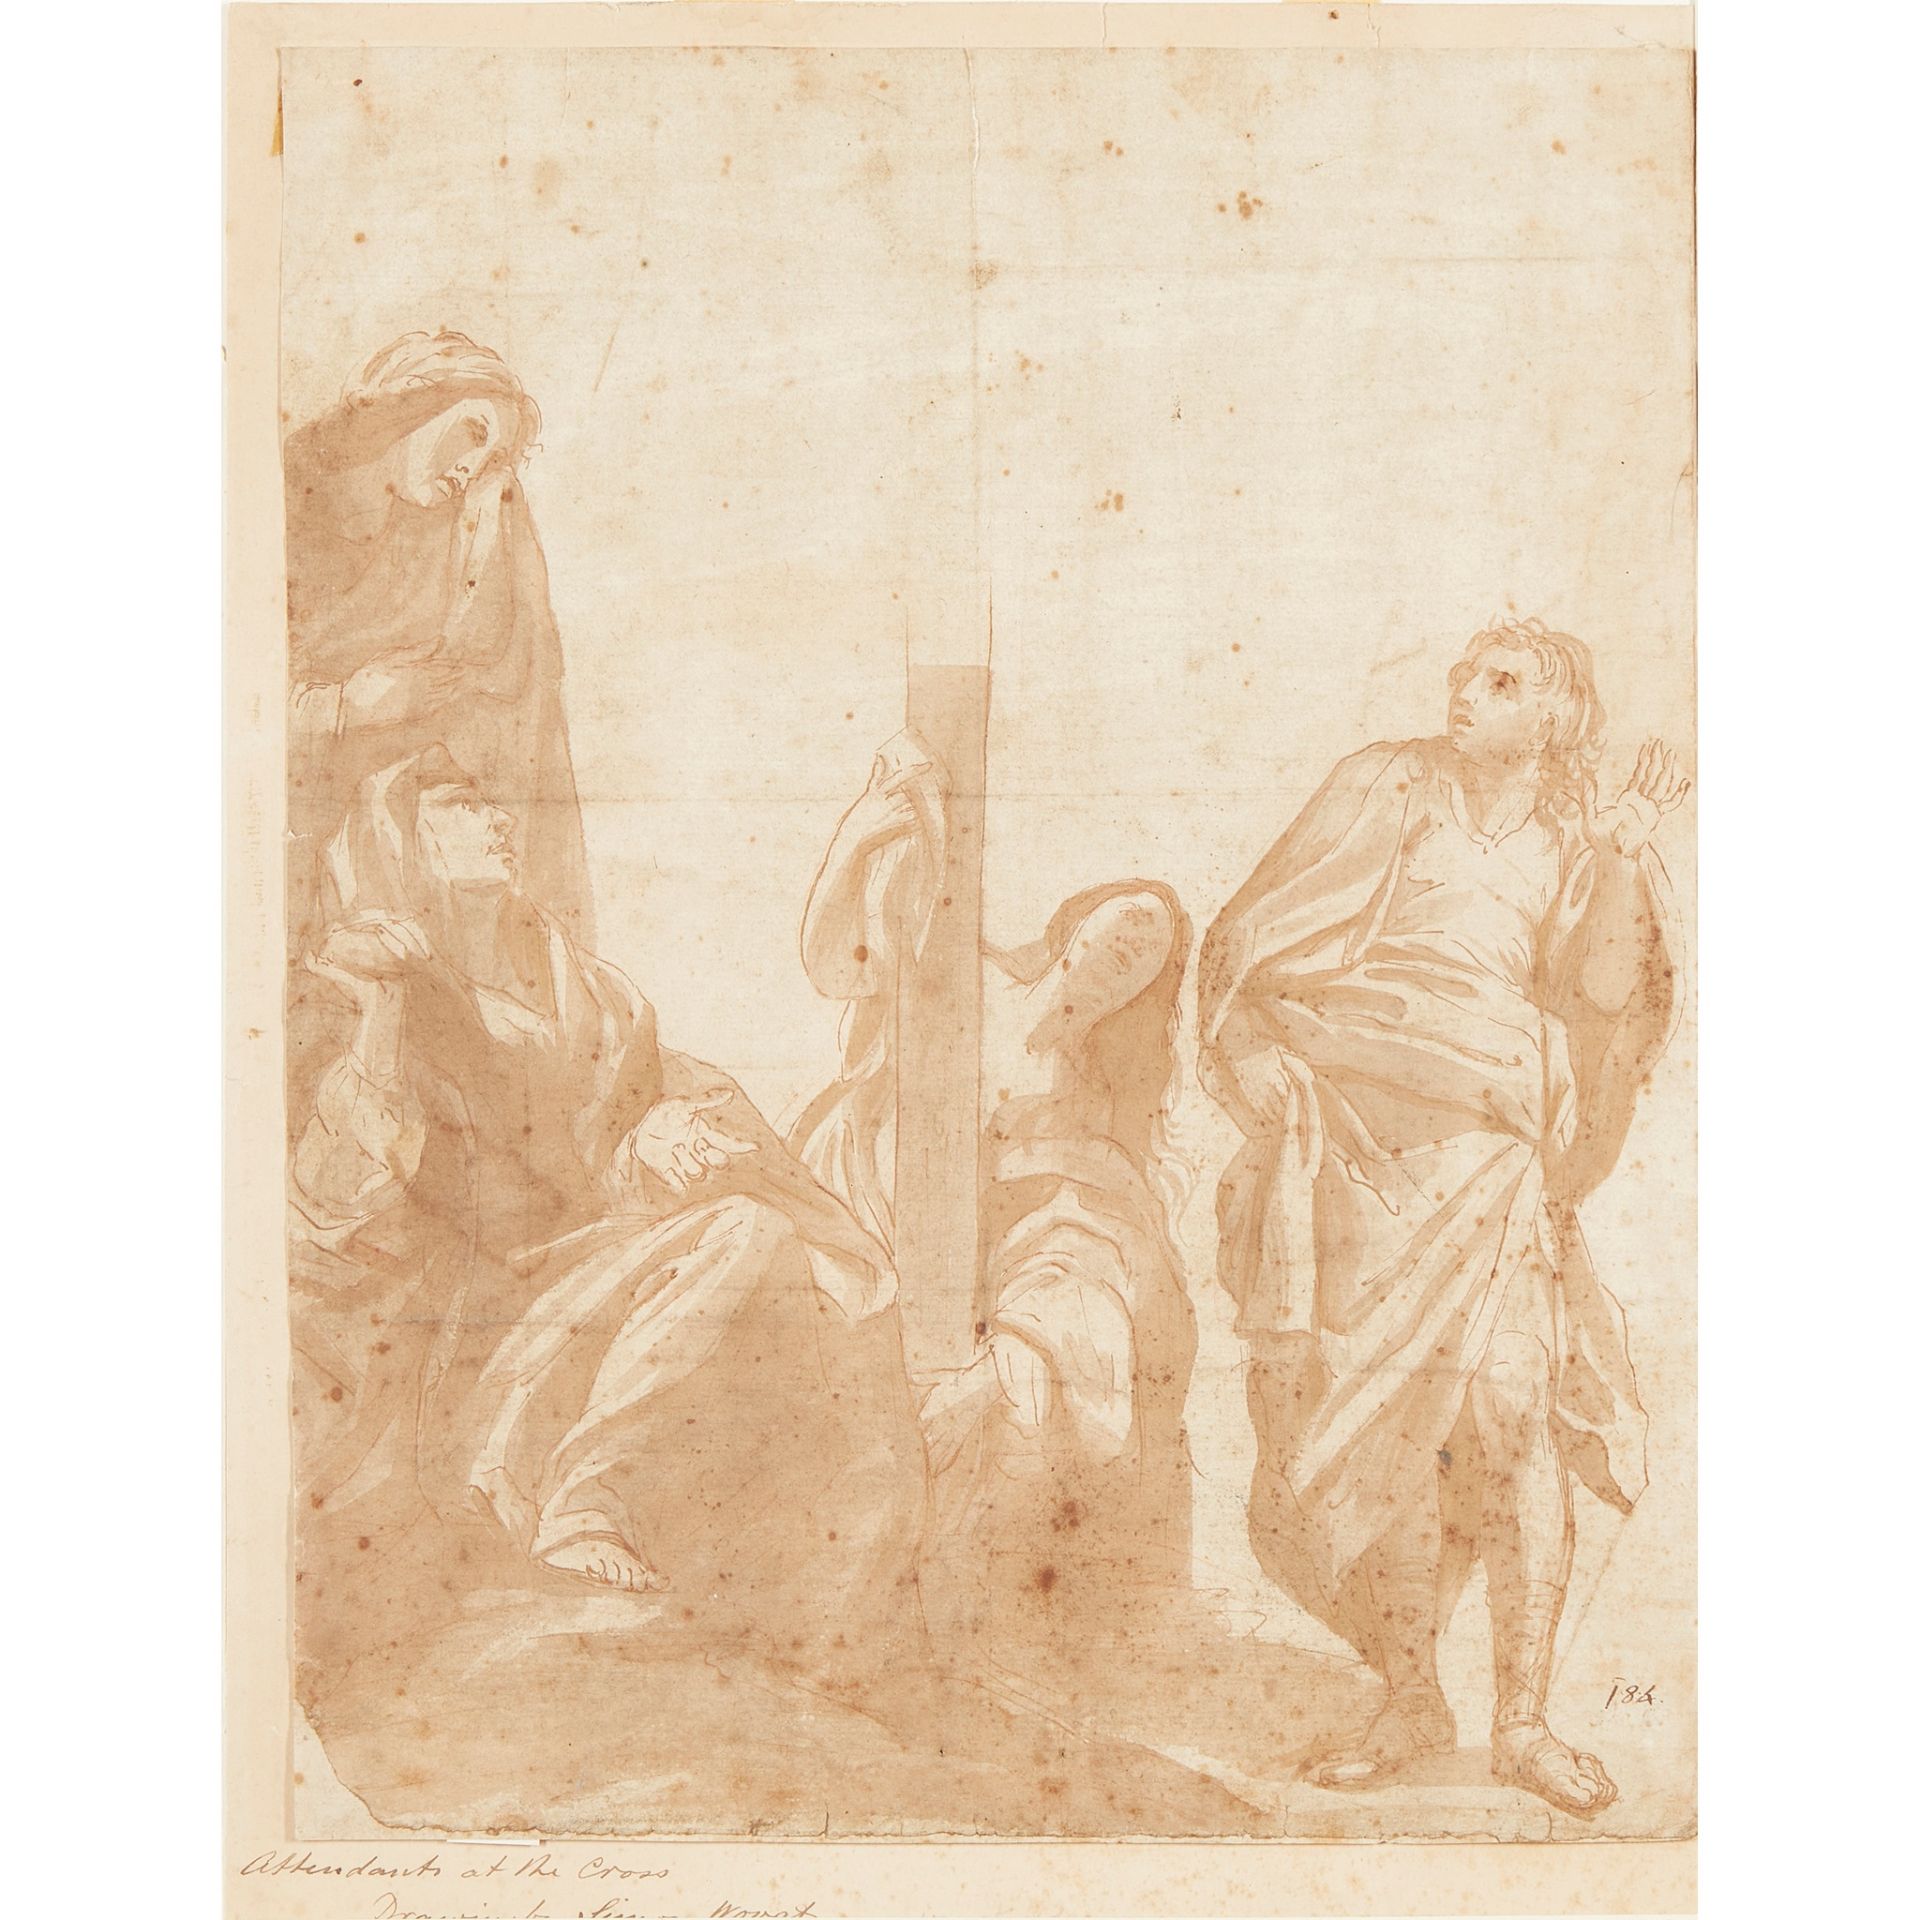 ATTRIBUTED TO SIMON VOUET (FRENCH 1590-1649) FIGURES BELOW THE CRUCIFIXION